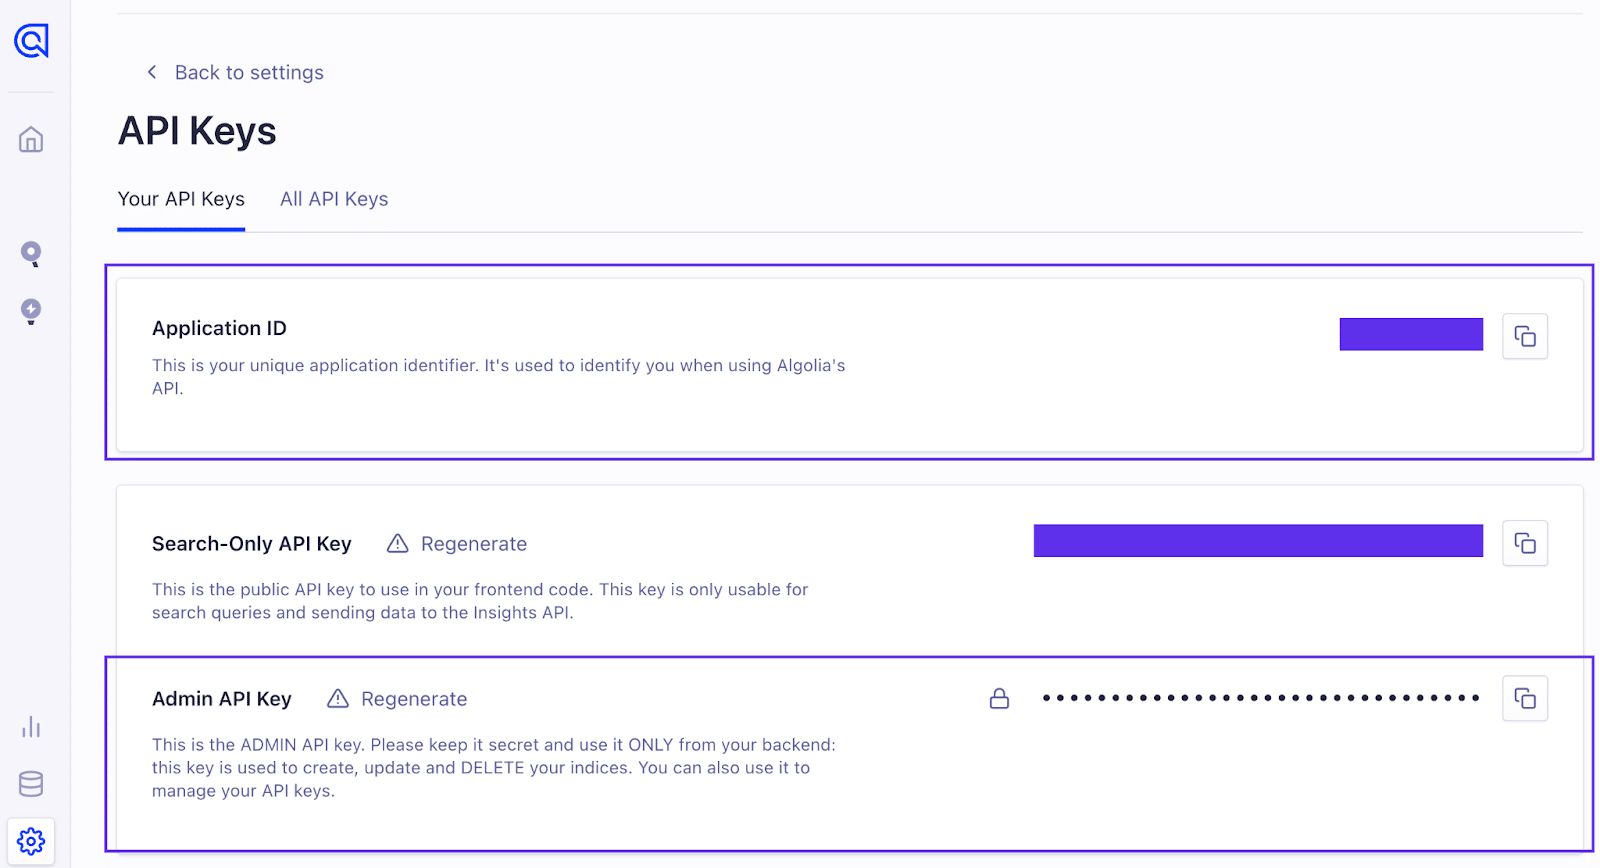 Viewing the Application ID and Admin API Keys from the Algolia API Keys page